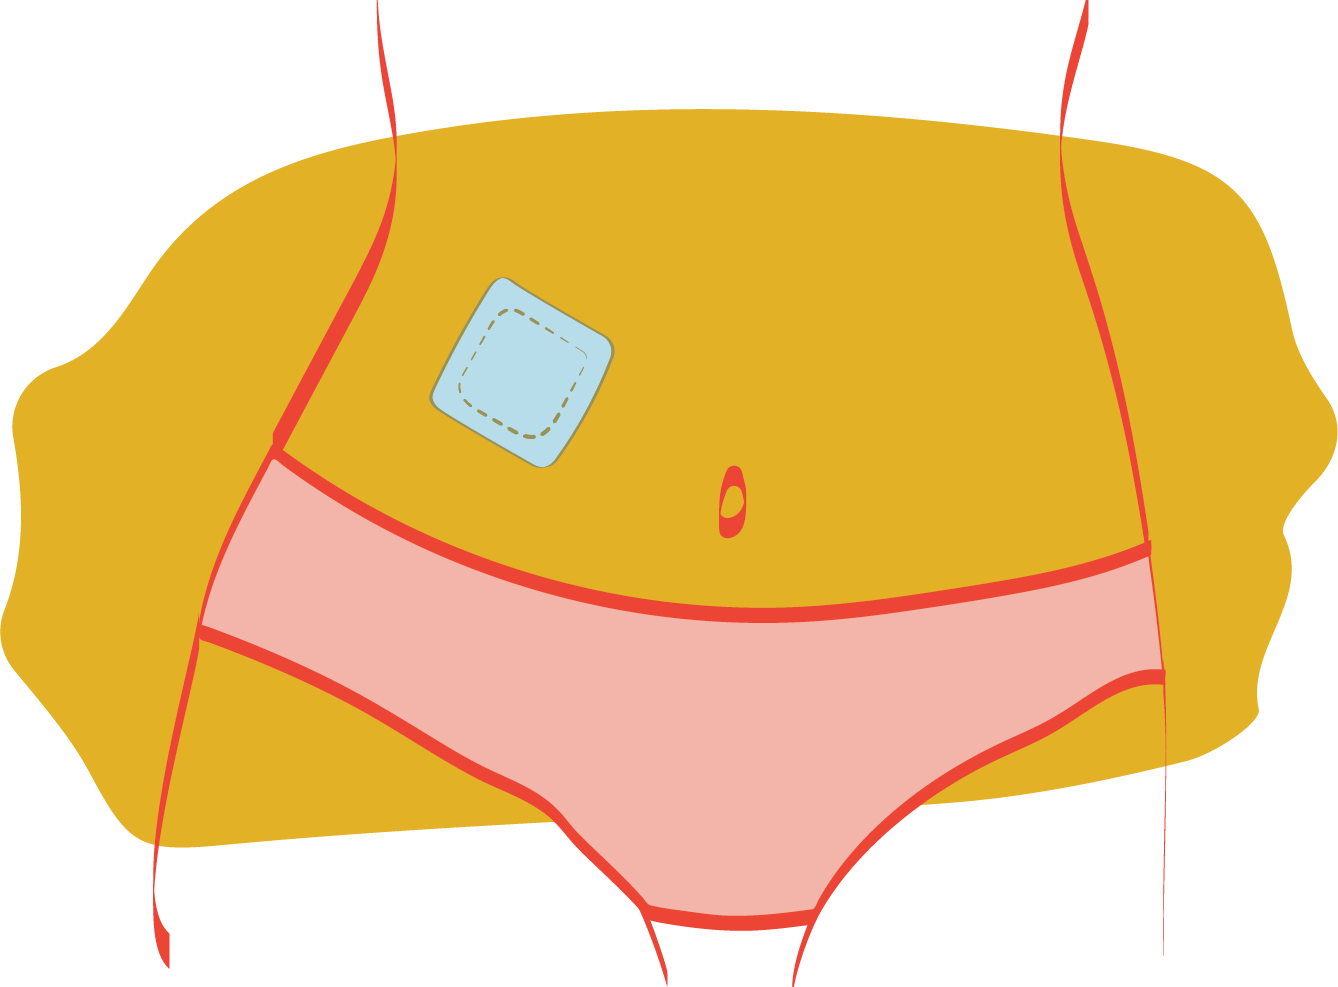 Contraceptive patch placed on the stomach